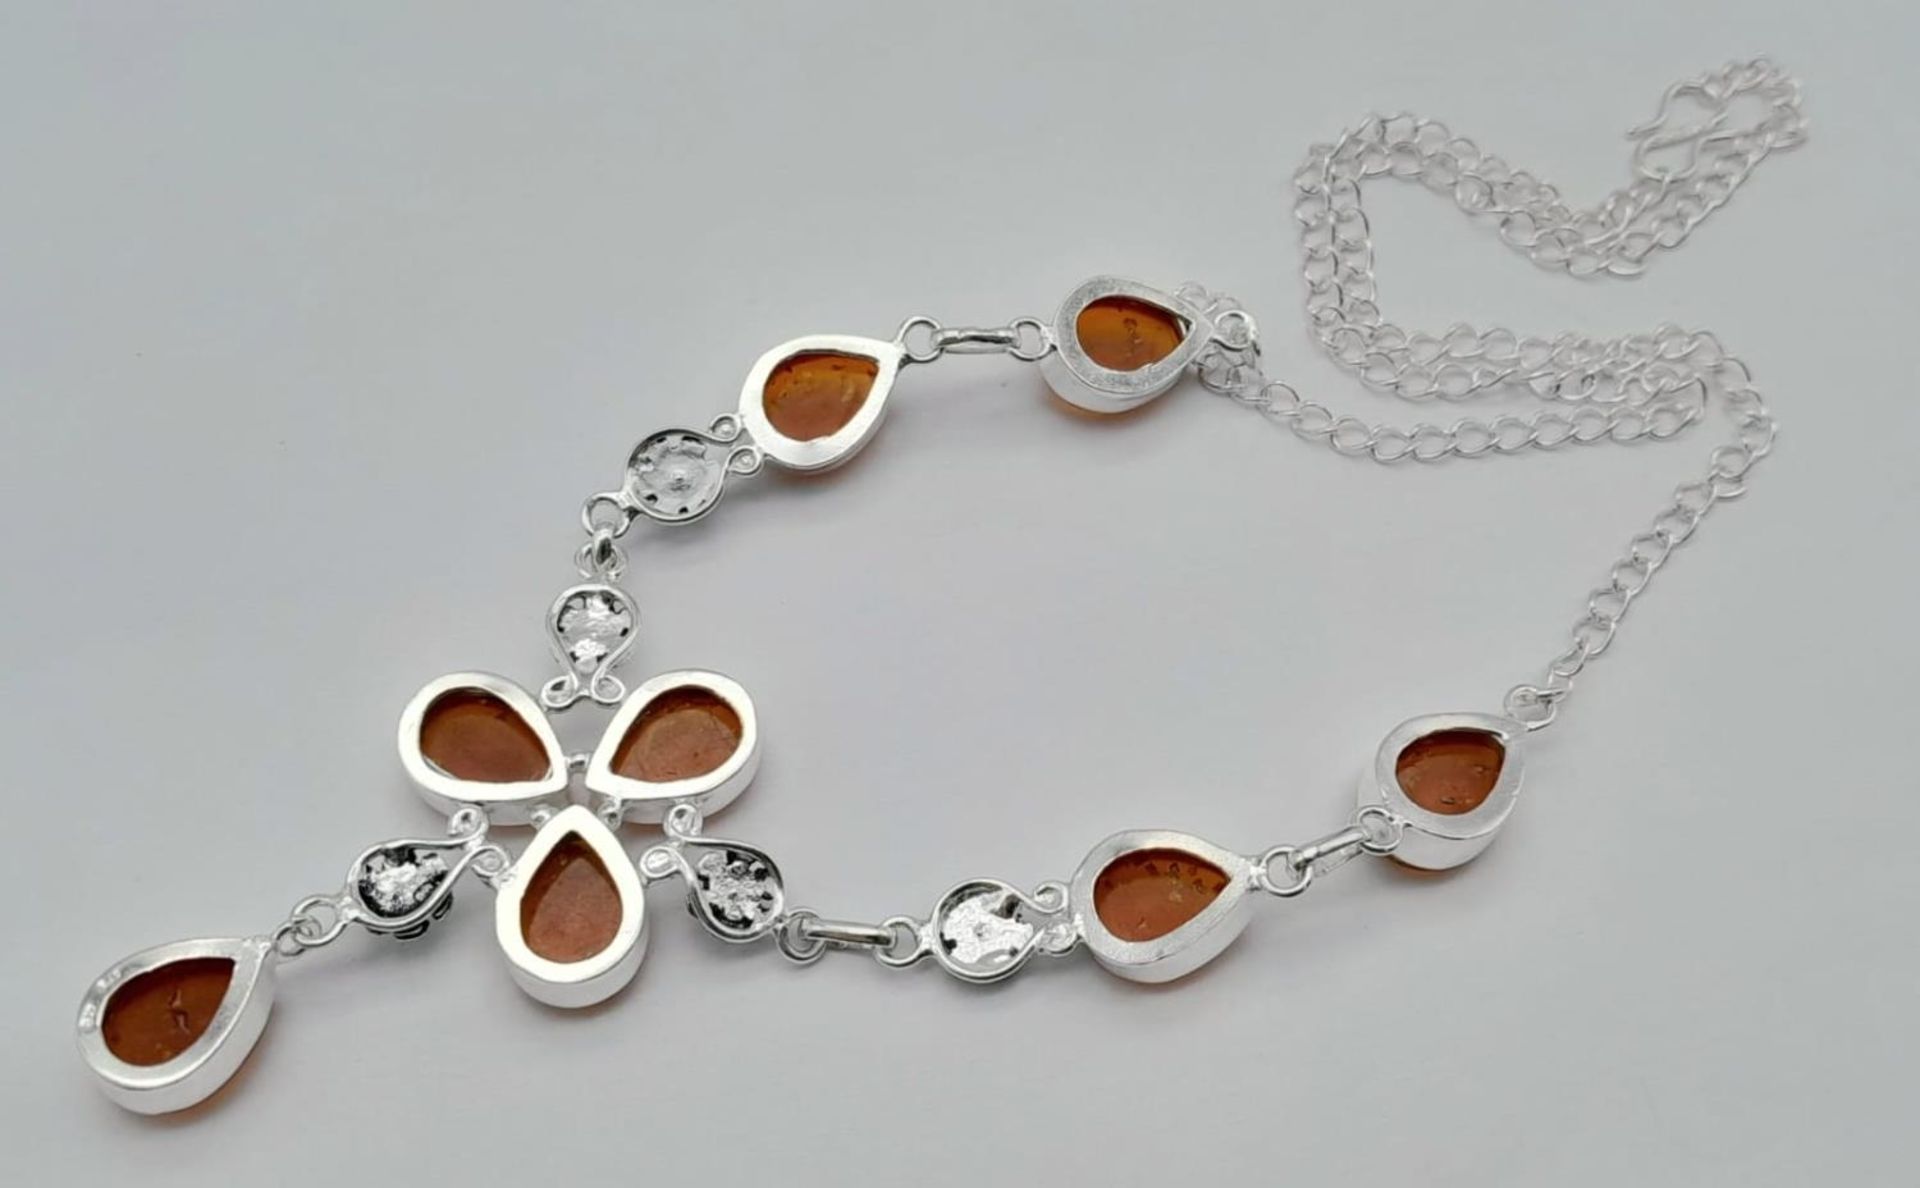 An Amber Resin Necklace set in 925 Silver. 50cm. - Image 2 of 4